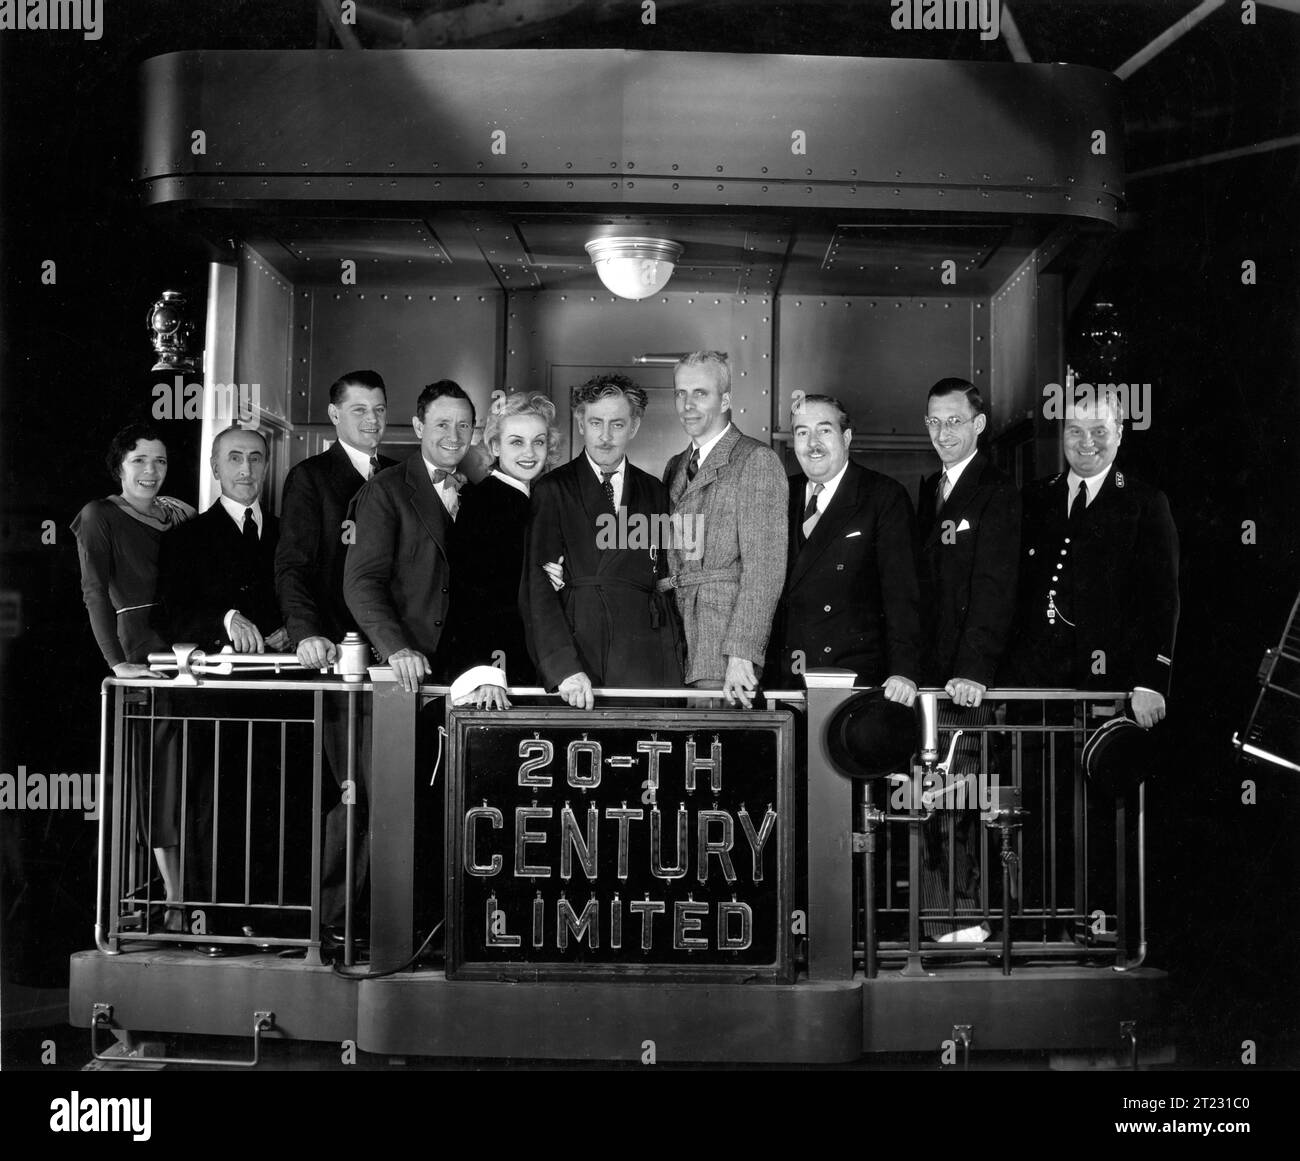 CAROLE LOMBARD, JOHN BARRYMORE and Director HOWARD HAWKS with members of the cast (left to right) Dale Fuller,, Etienne Giradot, Ralph Forbes, Roscoe Karns, Carole Lombard, John Barrymore, Howard Hawks, Walter Connolly,Charles Lane and James B. Burtis on the set of TWENTIETH CENTURY 1934 Screenplay BEN HECHT and CHARLES MacARTHUR Columbia Pictures Stock Photo